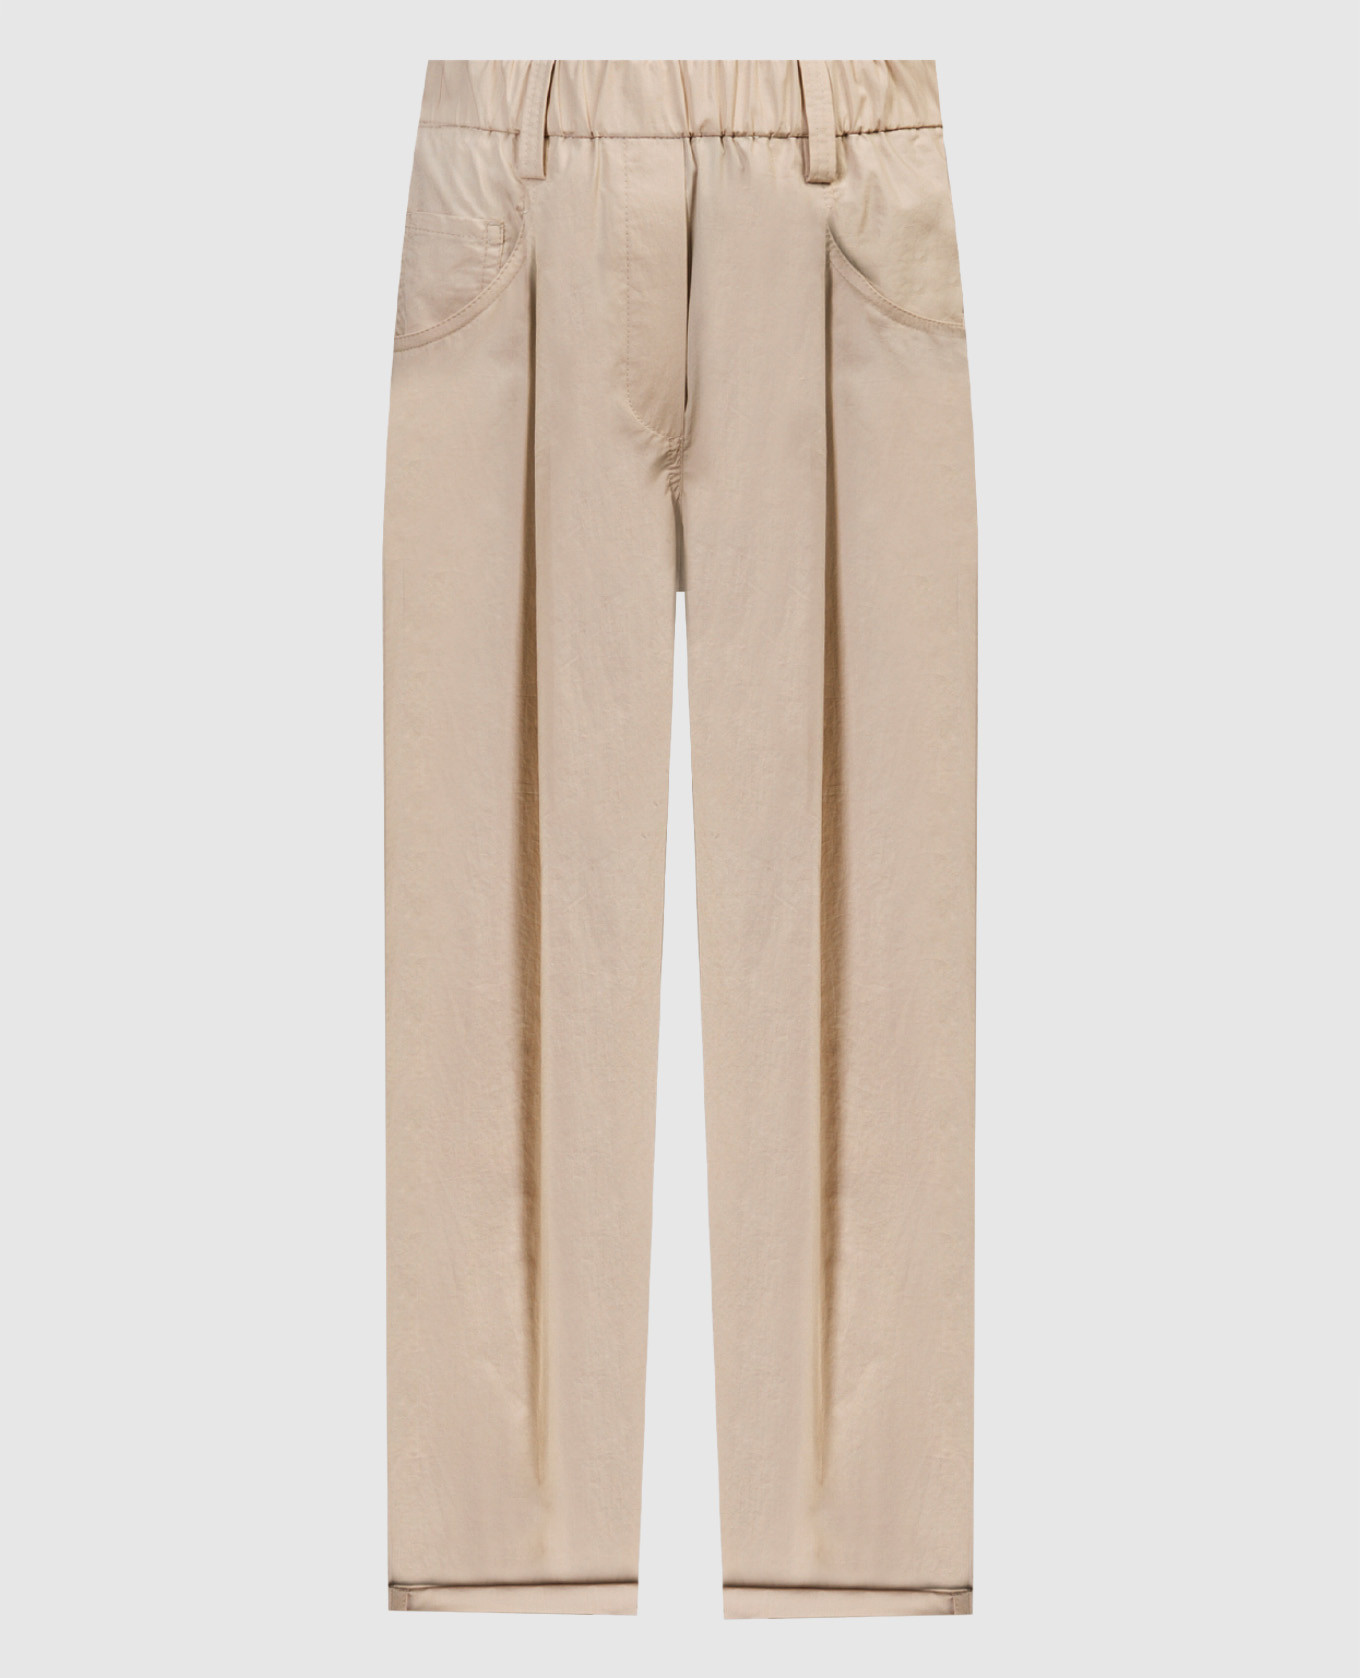 Beige pants with a monil chain made of ecolathuni